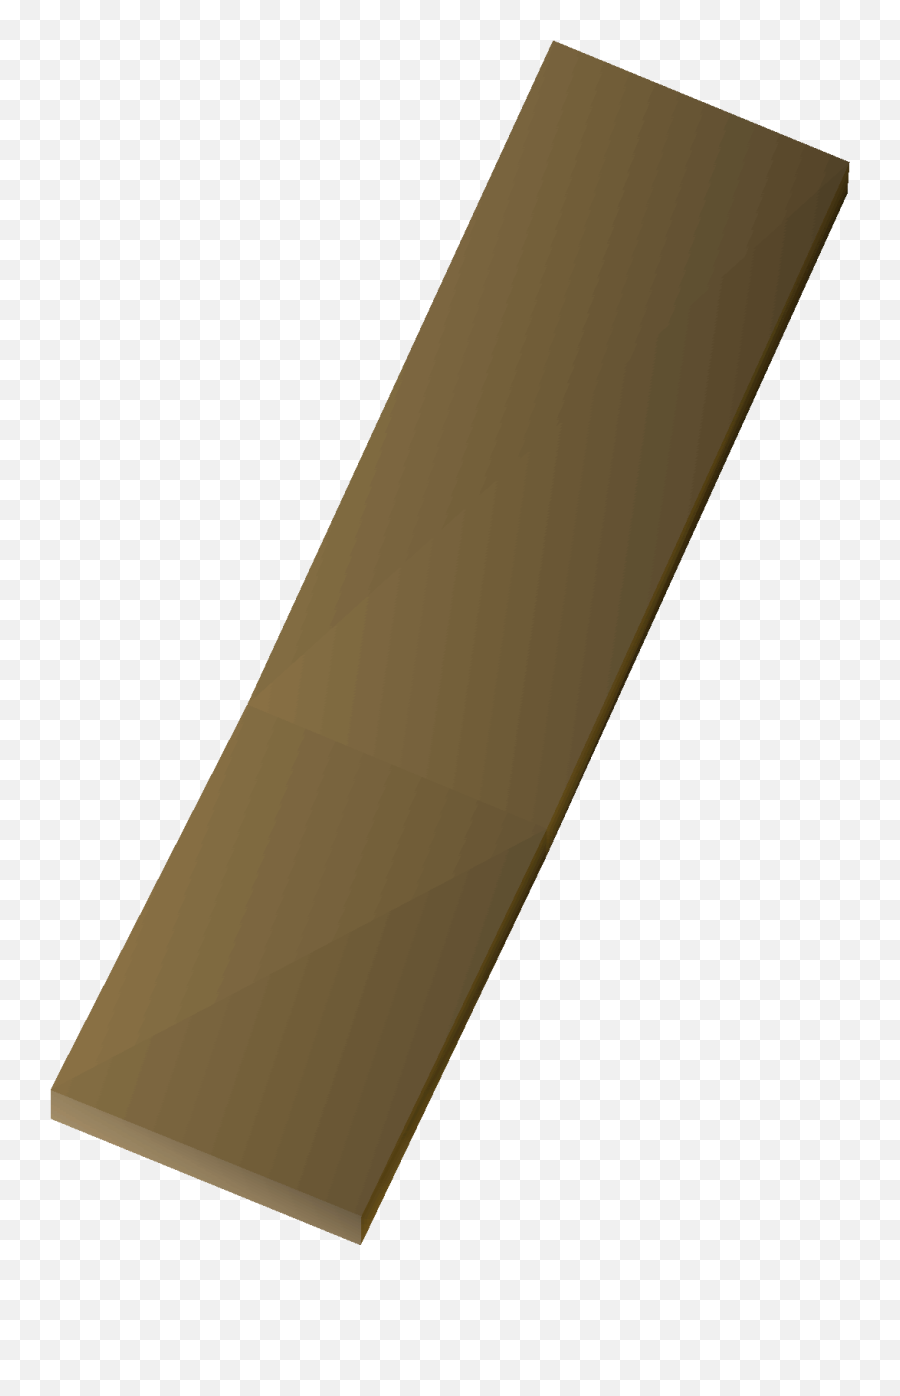 Plank - Mahogany Plank Osrs Png,Wood Plank Png